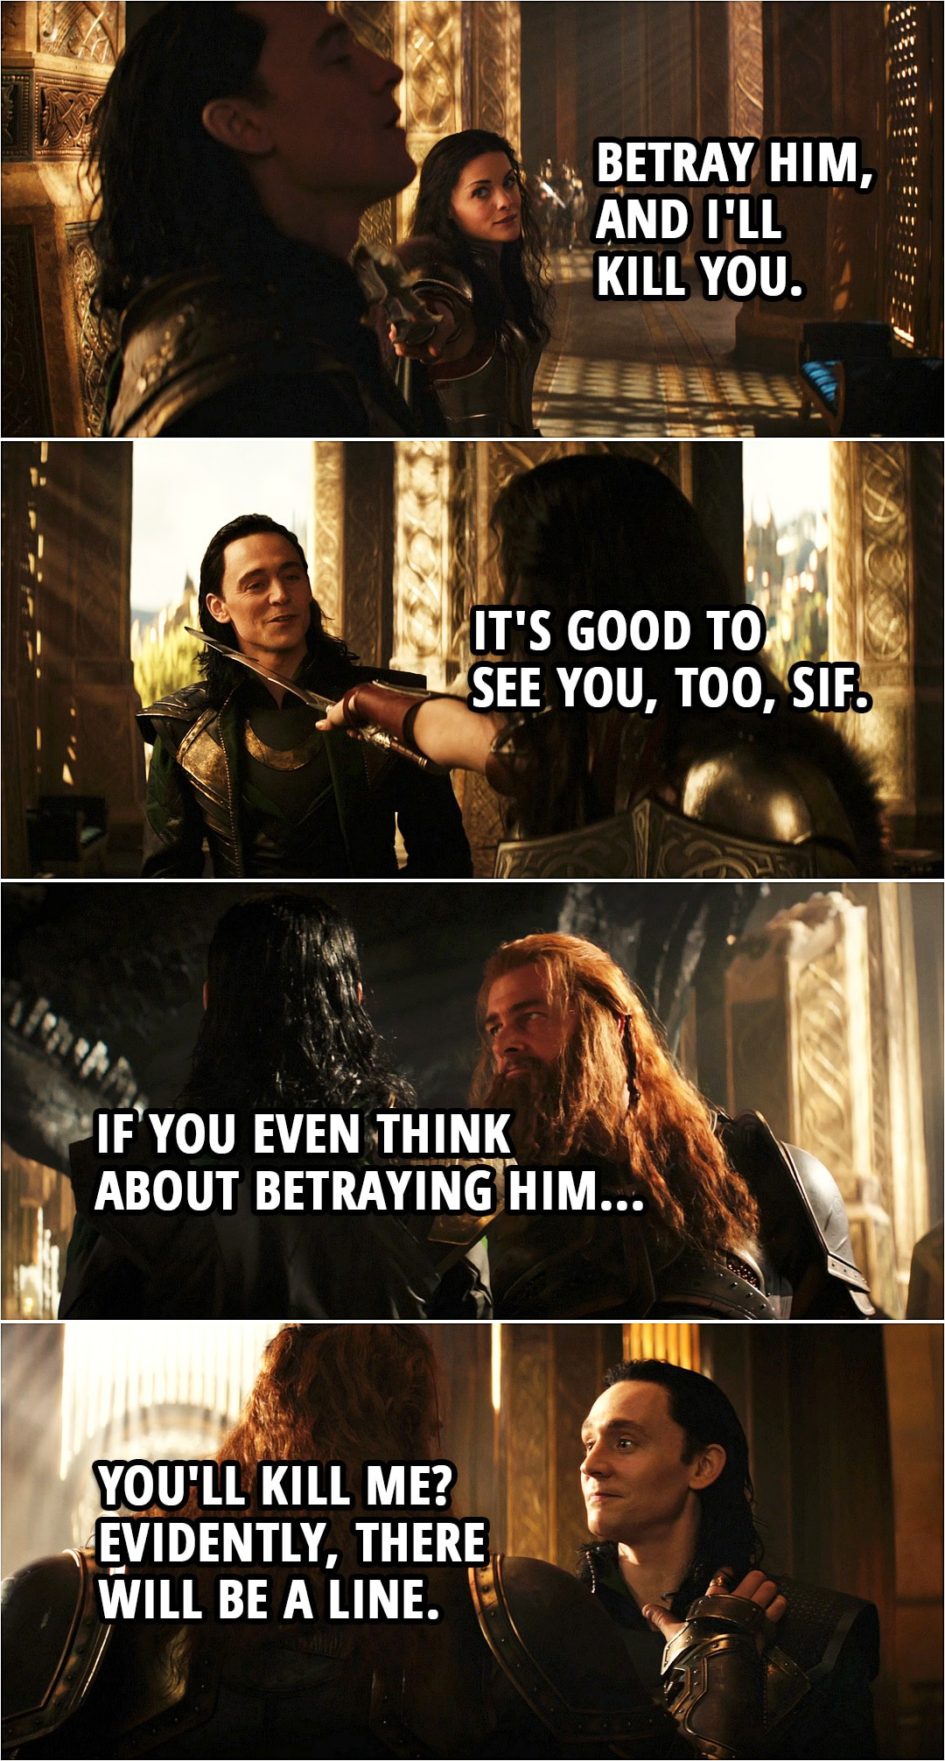 Quote from Thor: The Dark World (2013) | Lady Sif: Betray him, and I'll kill you. Loki: It's good to see you, too, Sif. (Few minutes later...) Volstagg: If you even think about betraying him... Loki: You'll kill me? Evidently, there will be a line.